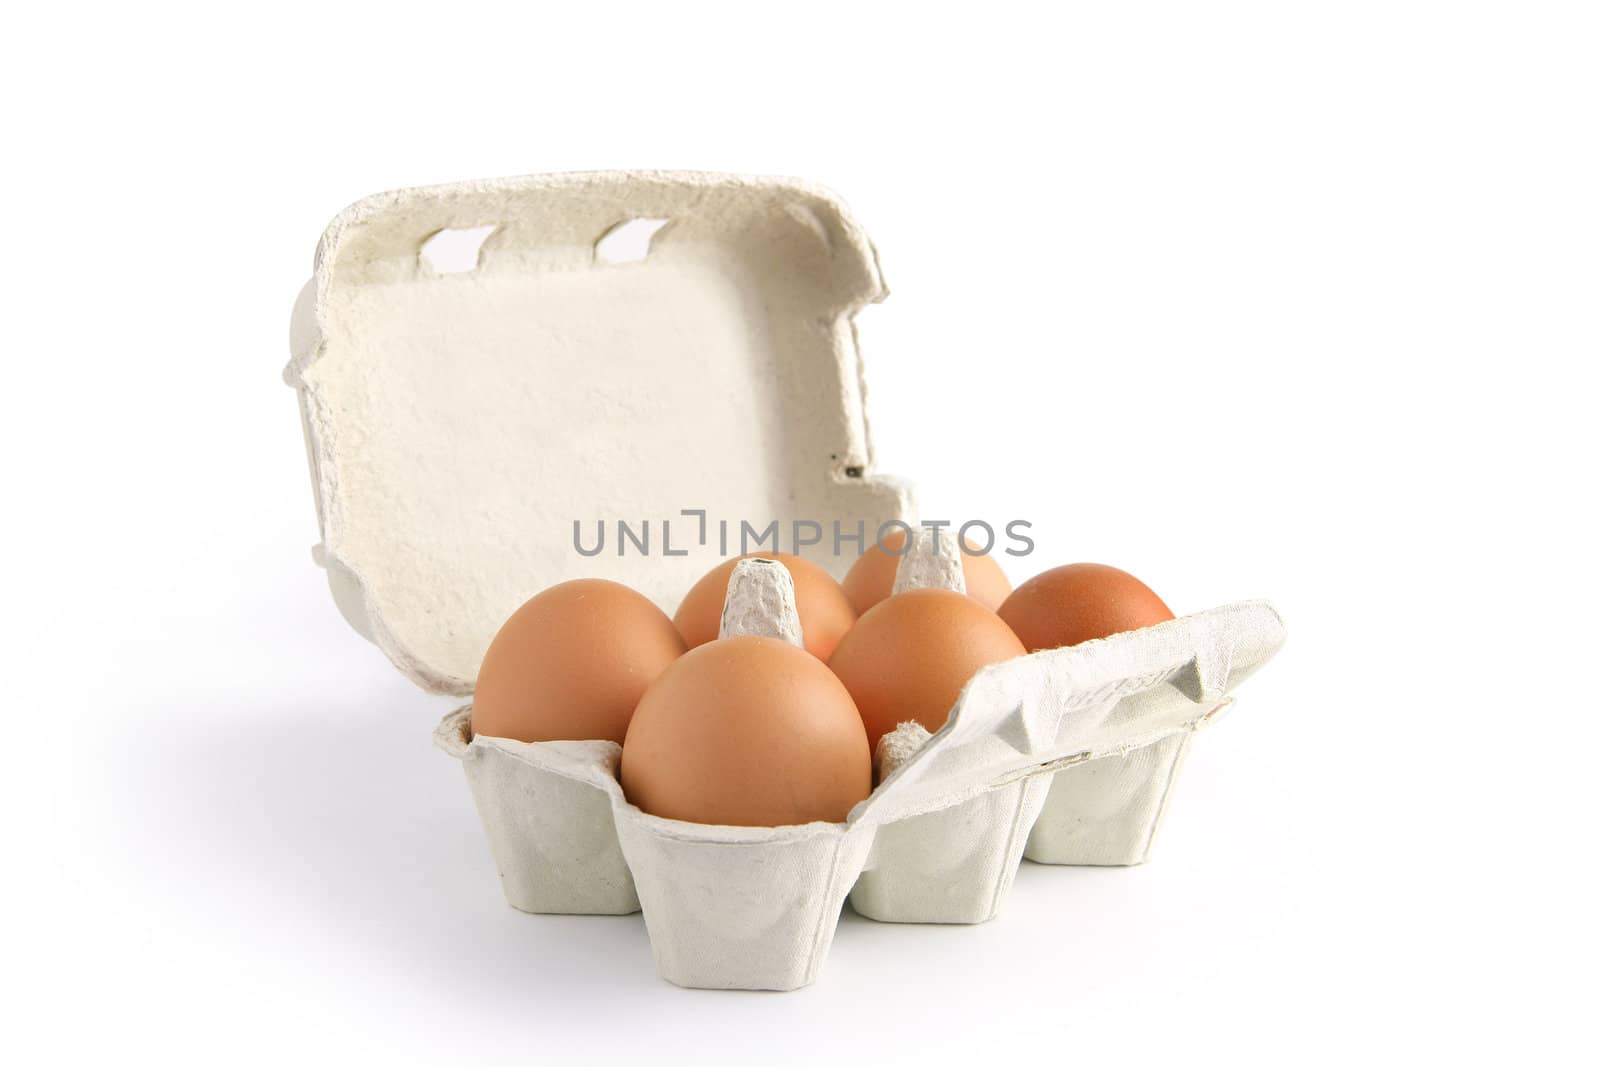 Six eggs in a box by phovoir